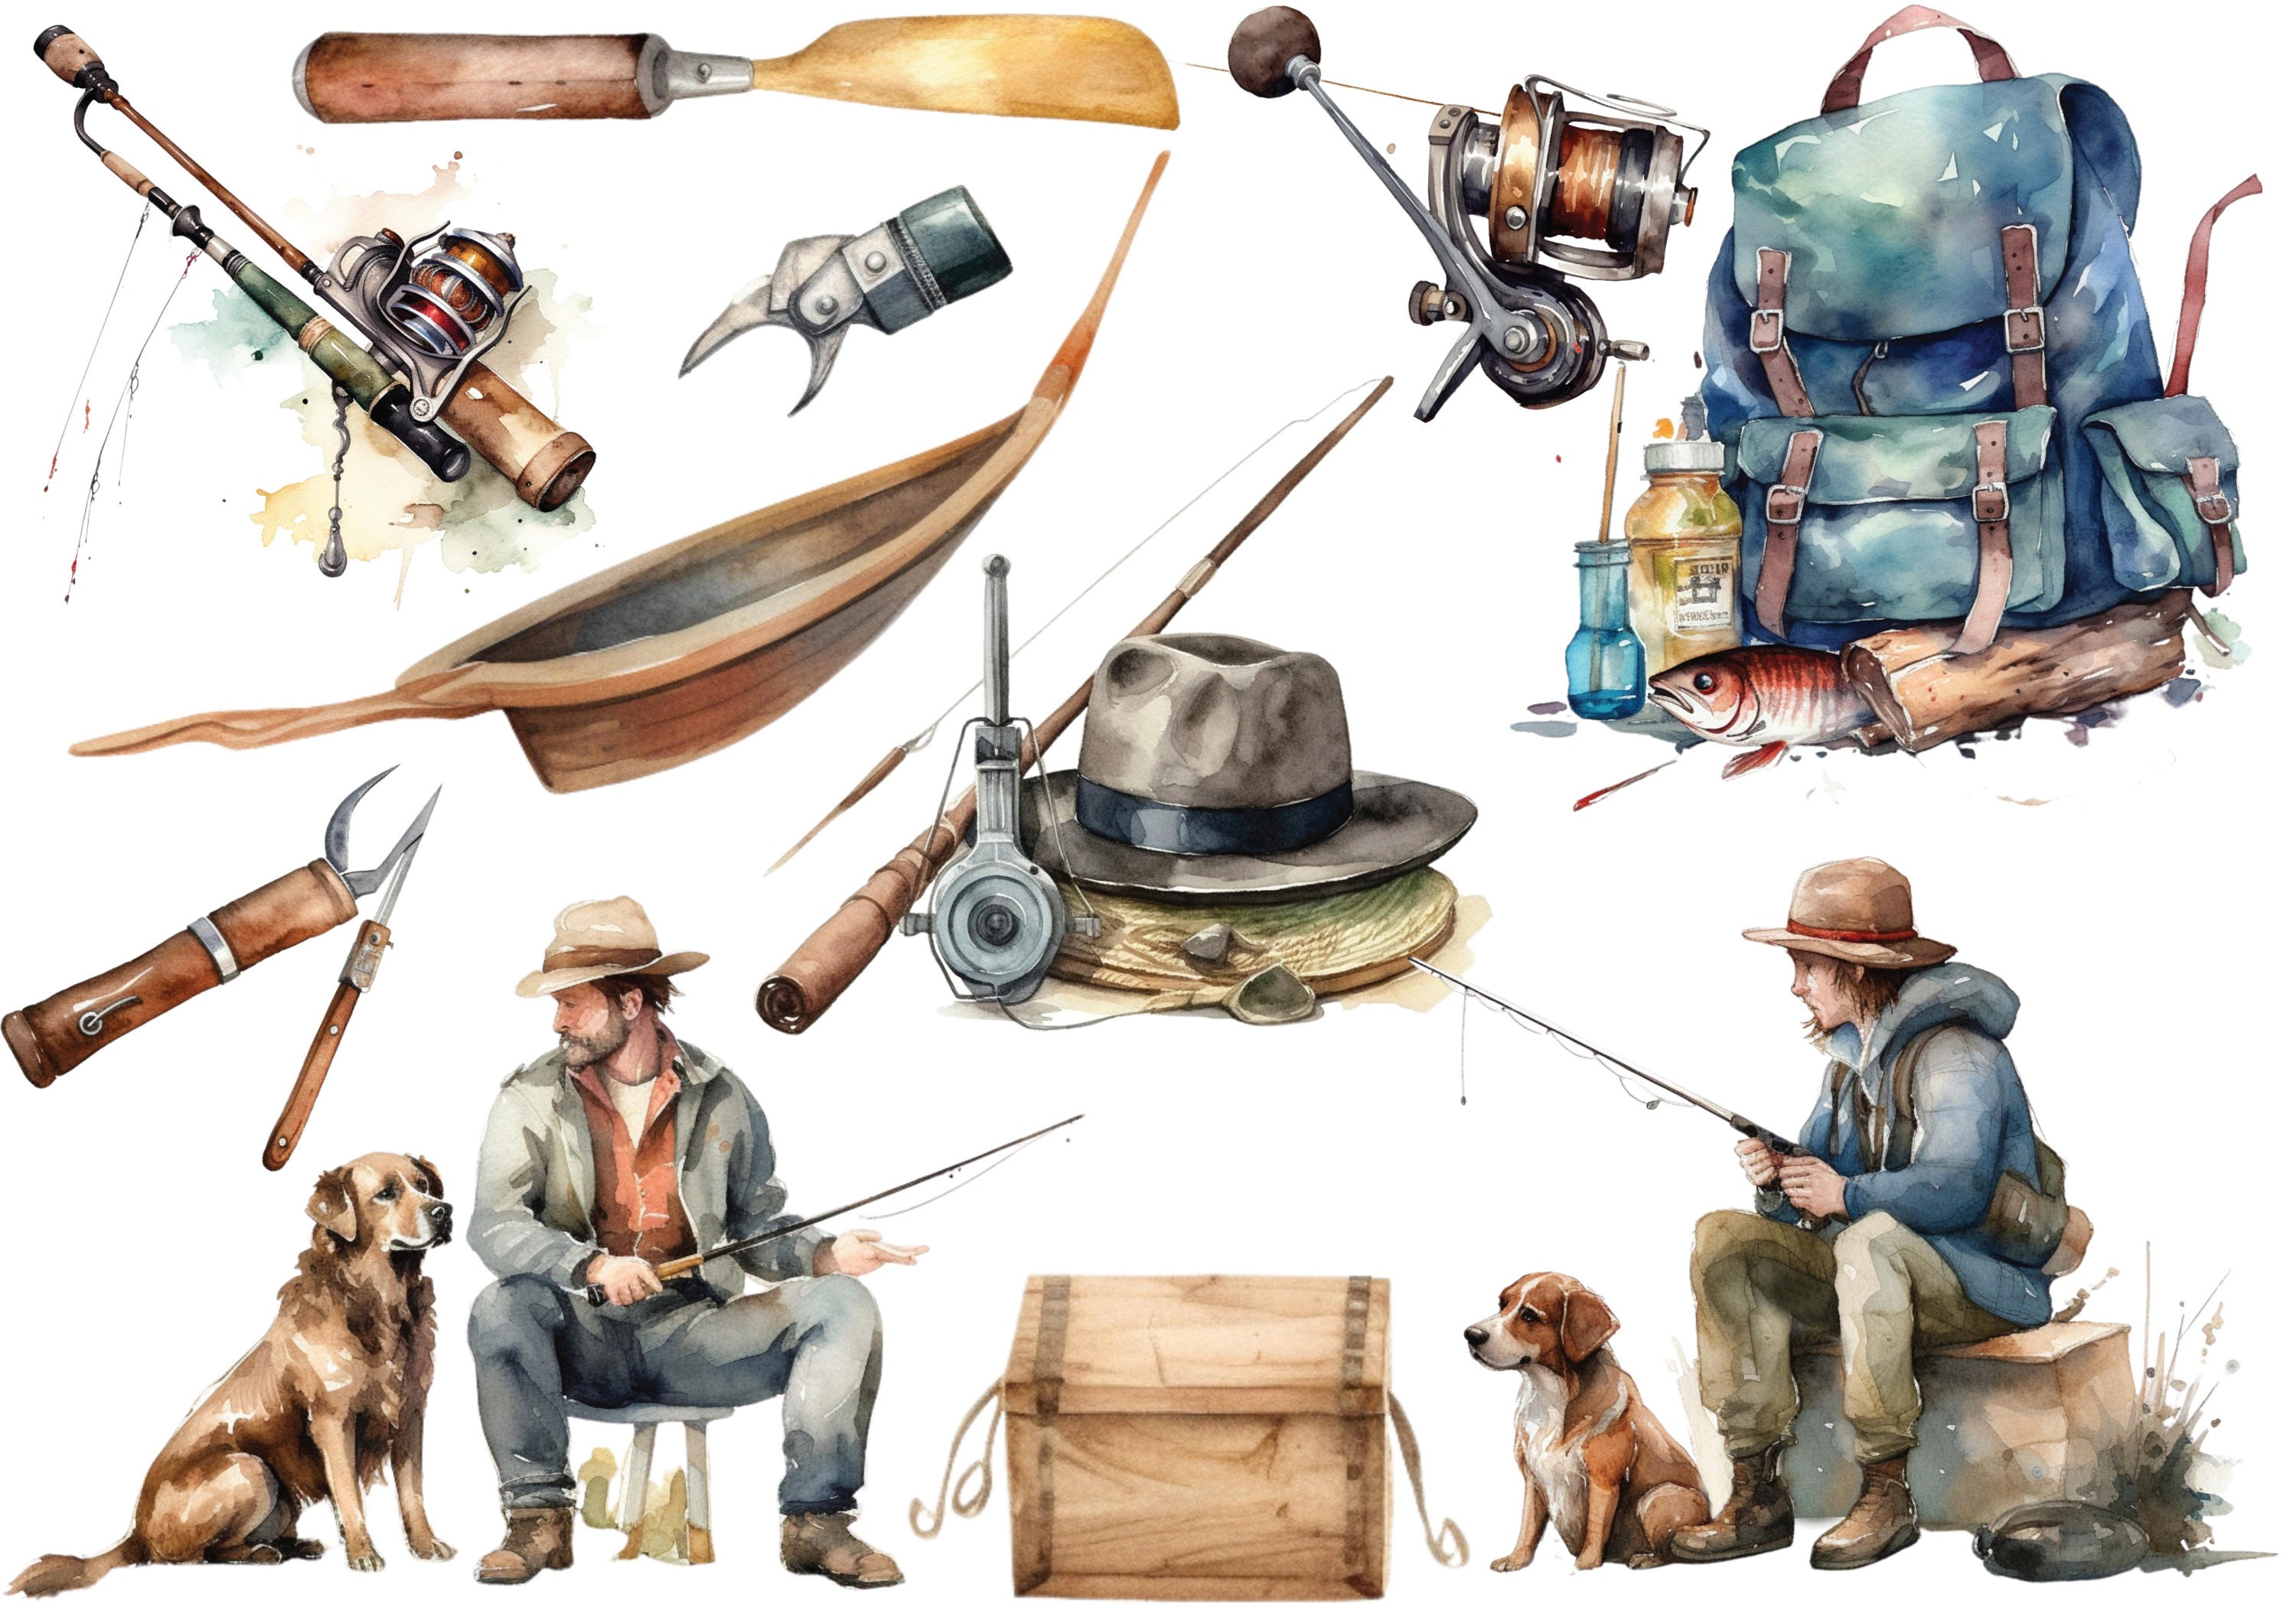 Set Fishing Hook, Binoculars, Chicken Leg, Campfire, Calendar with Tree,  Tree, Hiking Backpack and Canteen Water Bottle Stock Illustration -  Illustration of isolated, merry: 227670663